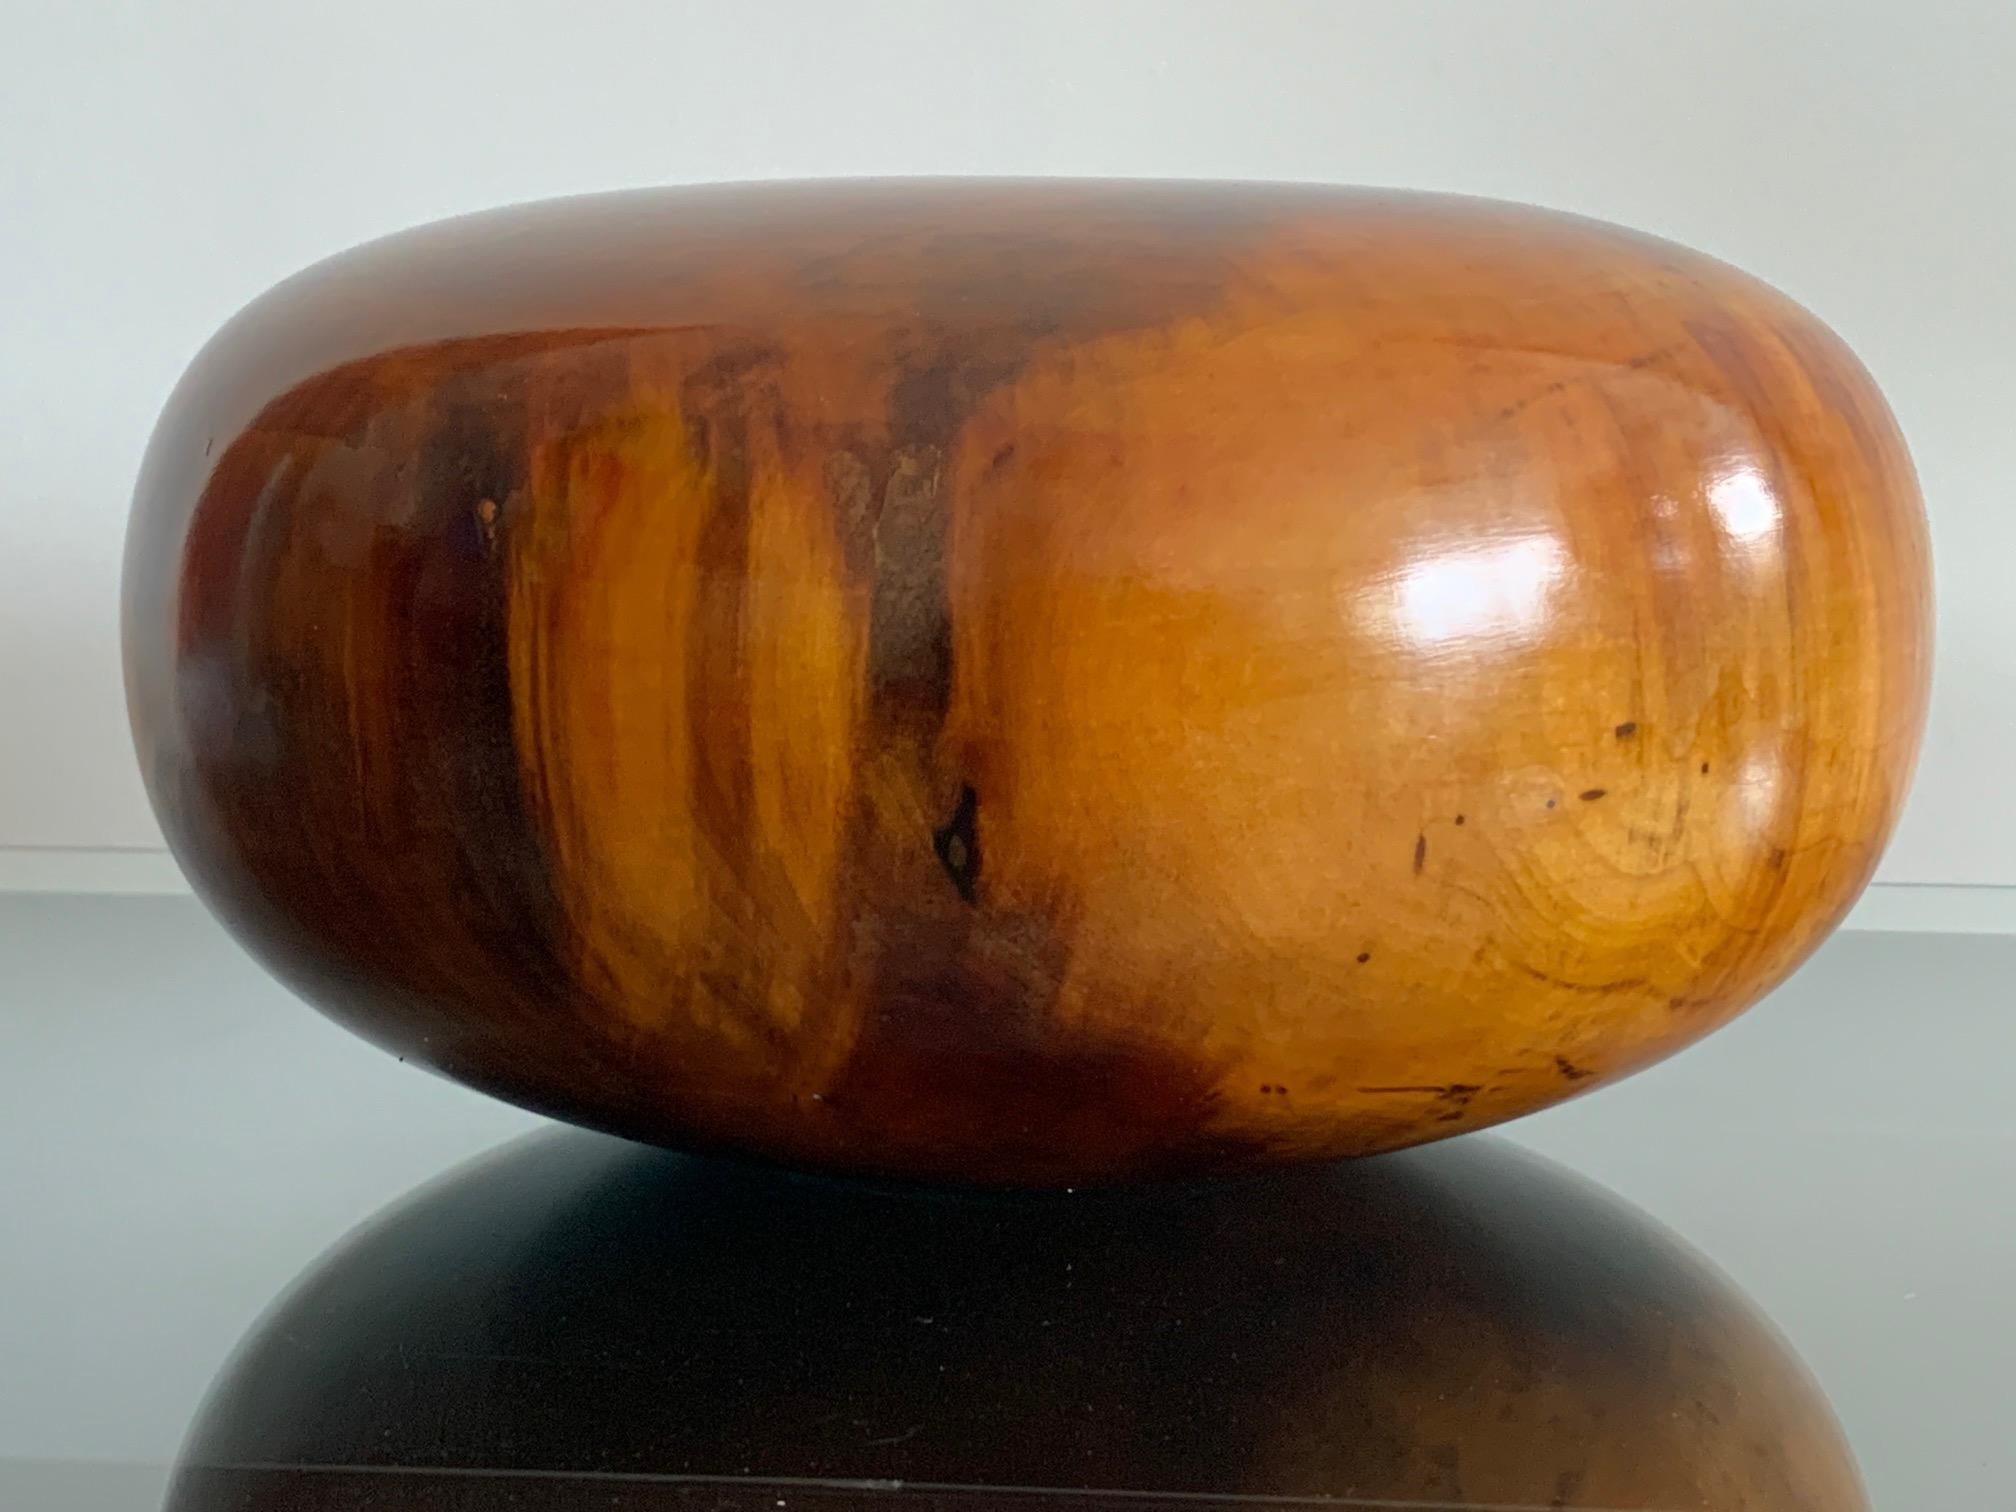 A unique and rare turned bowl by Ed Moulthrop. Made of figured tulipwood and finished in reflective gloss the bowl has great presence and an aura of mystery. Very painterly effect achieved by chiaroscuro in natural wood graining, while remaining a